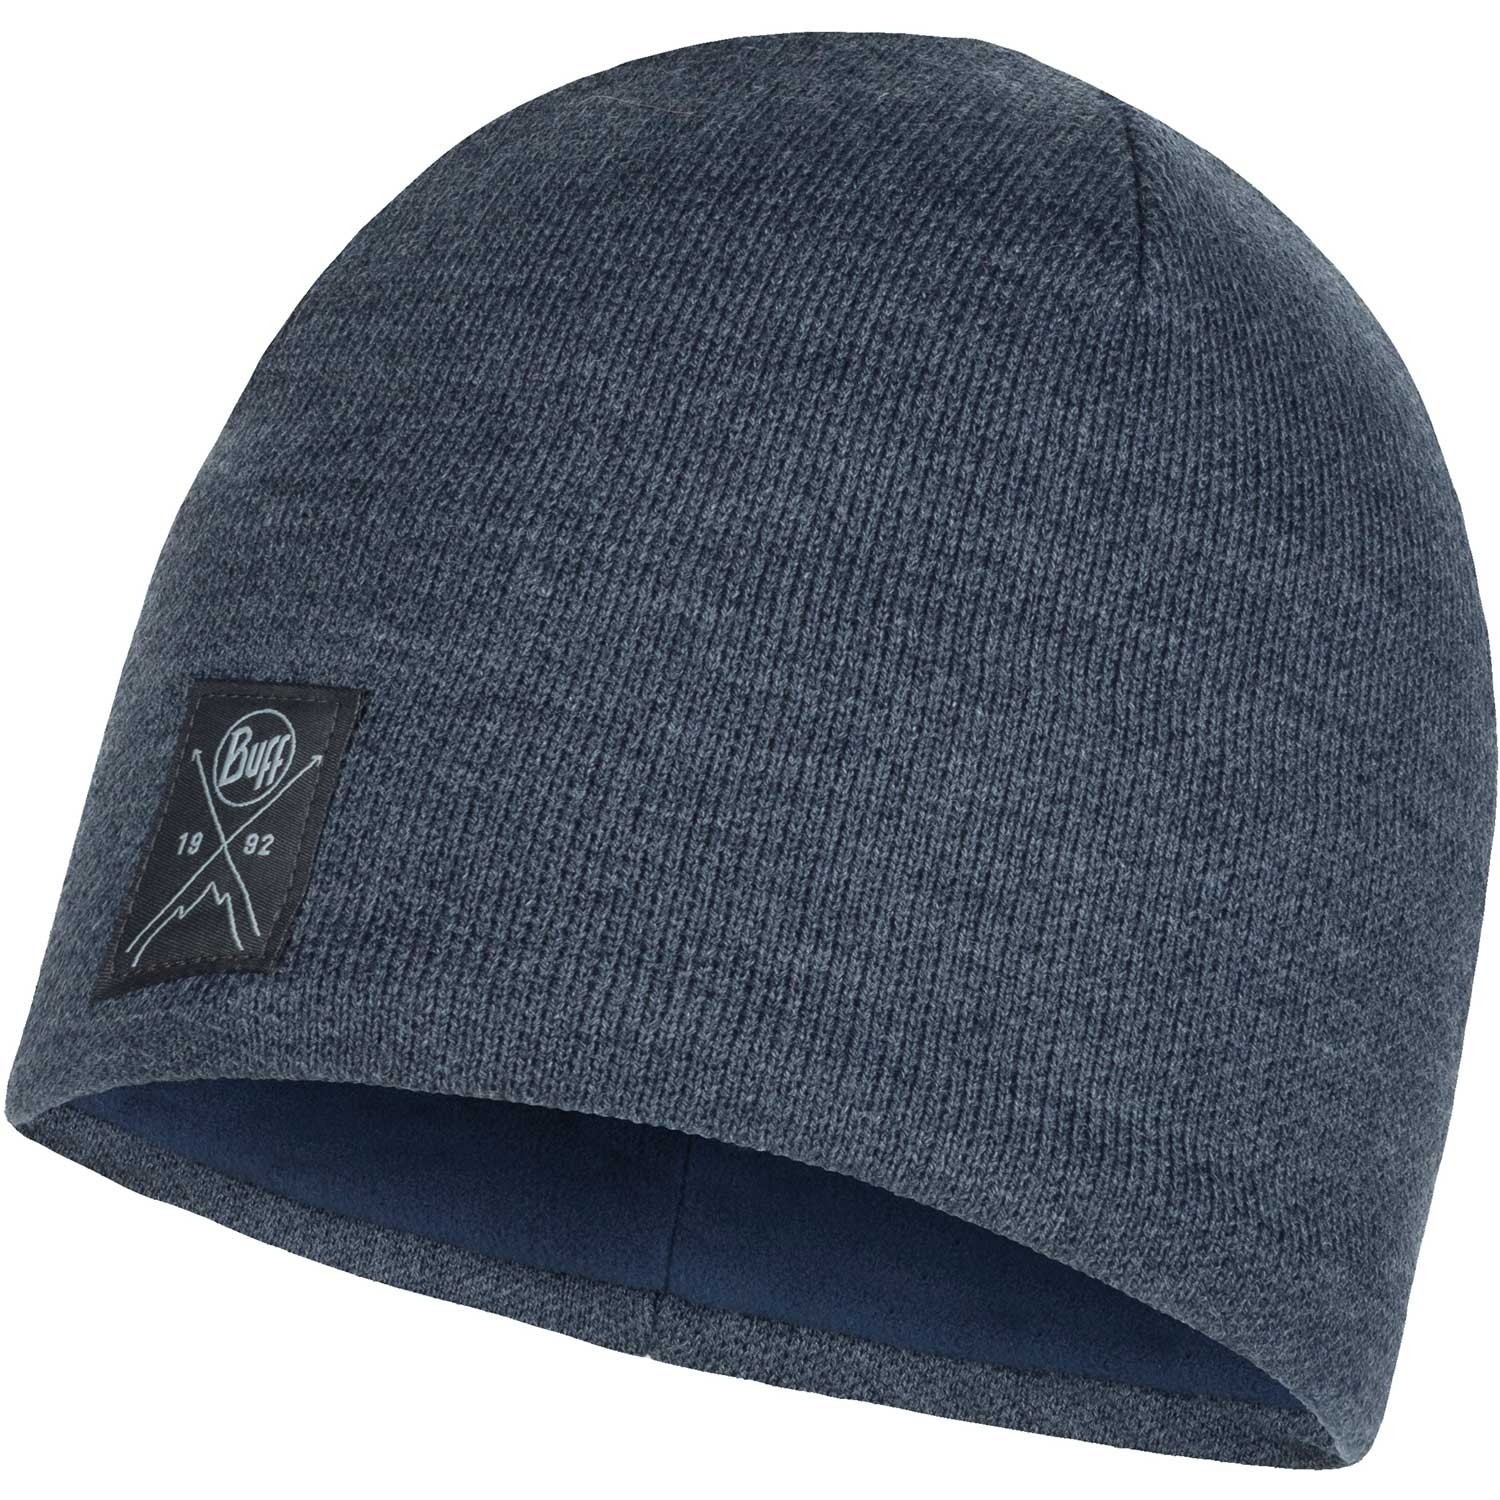 Buff Solid Knitted & Polar Hat - Navy